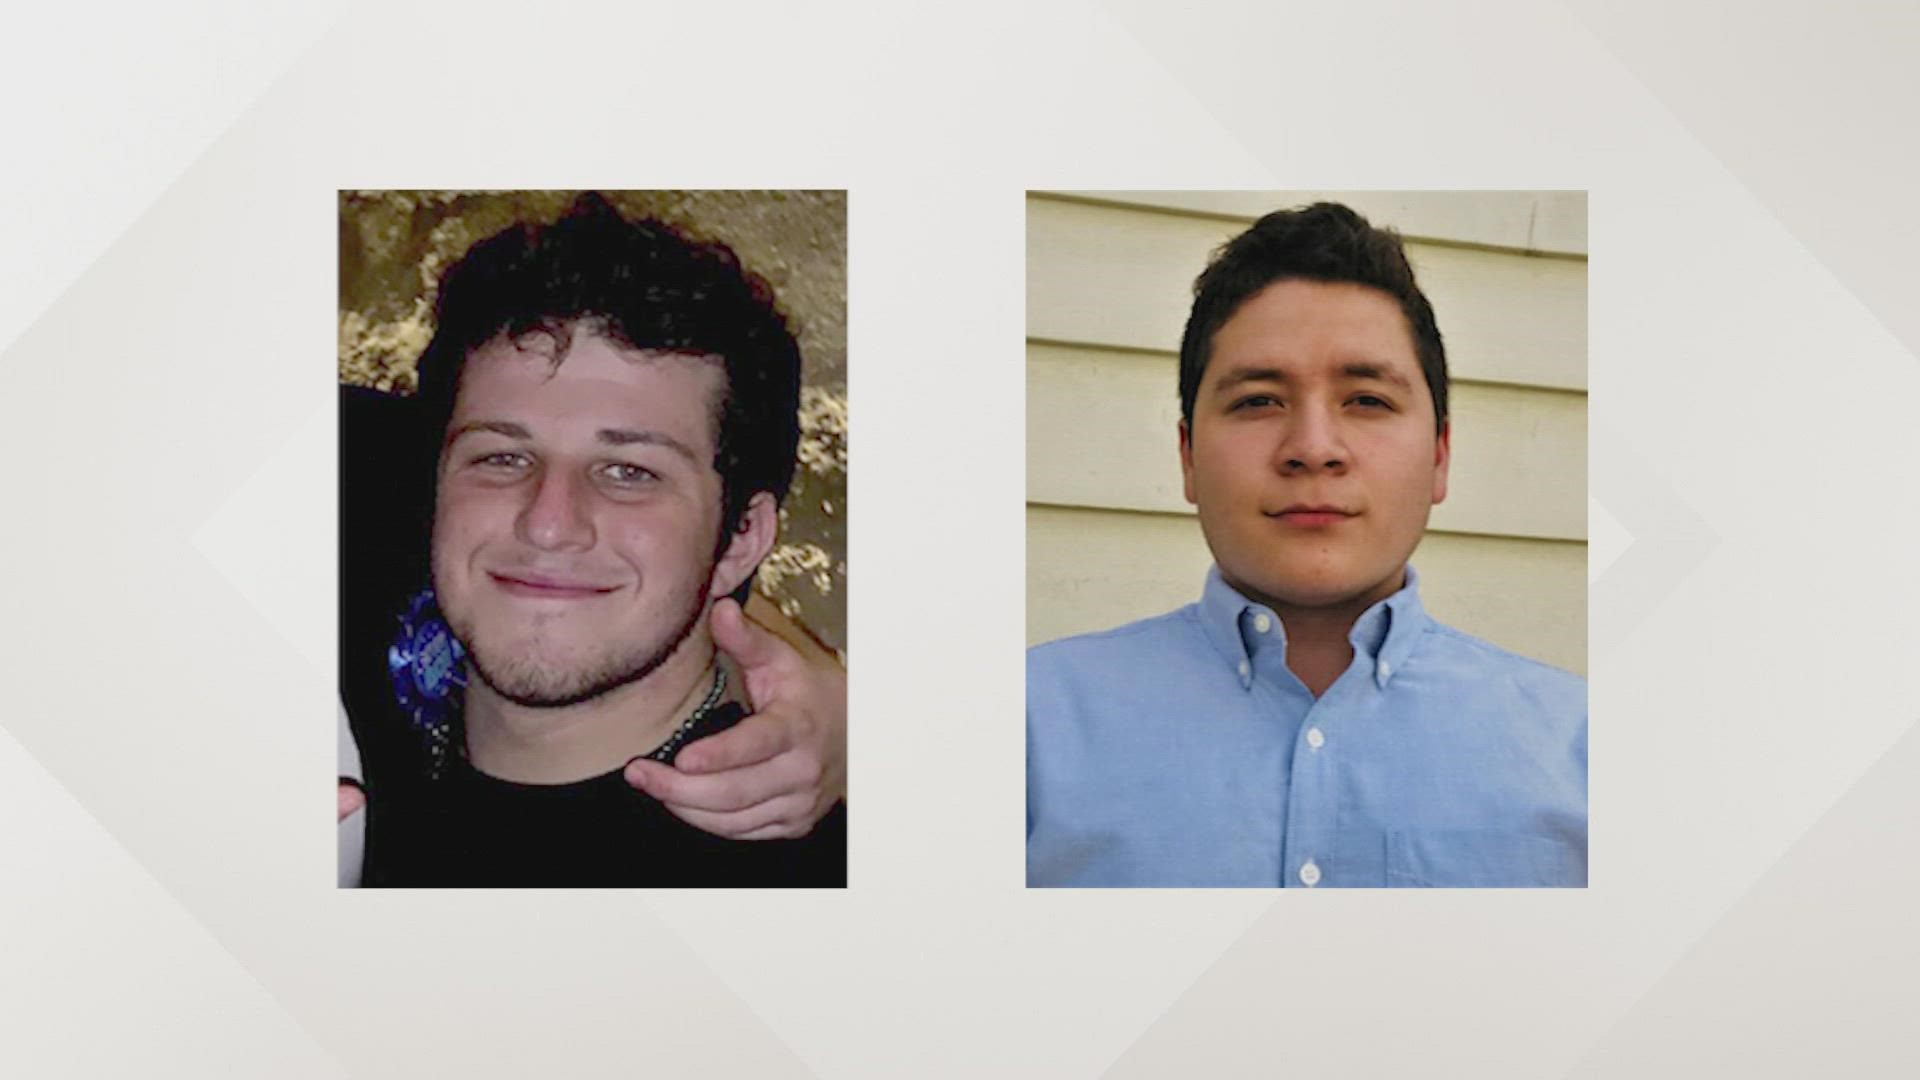 Franco Patino, 21, and Jake Jurinek, 20, were friends who came to Houston from Naperville for the music festival. Both died in the crush of 50,000 fans.